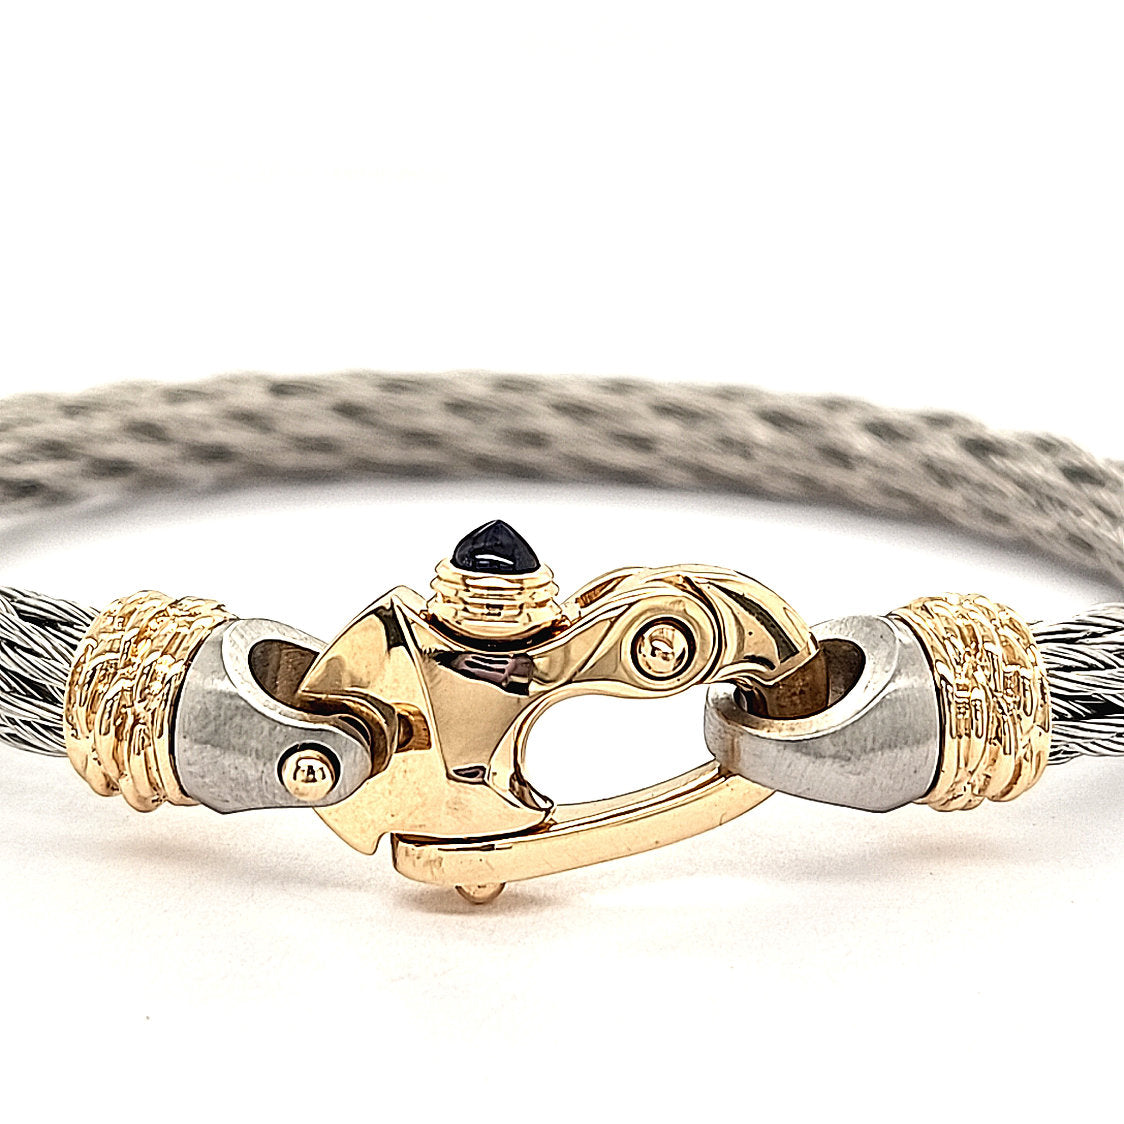 Nouveau Braid® 6.5mm Cable Bracelet with Gold Mariner's Clasp® and Ferrules